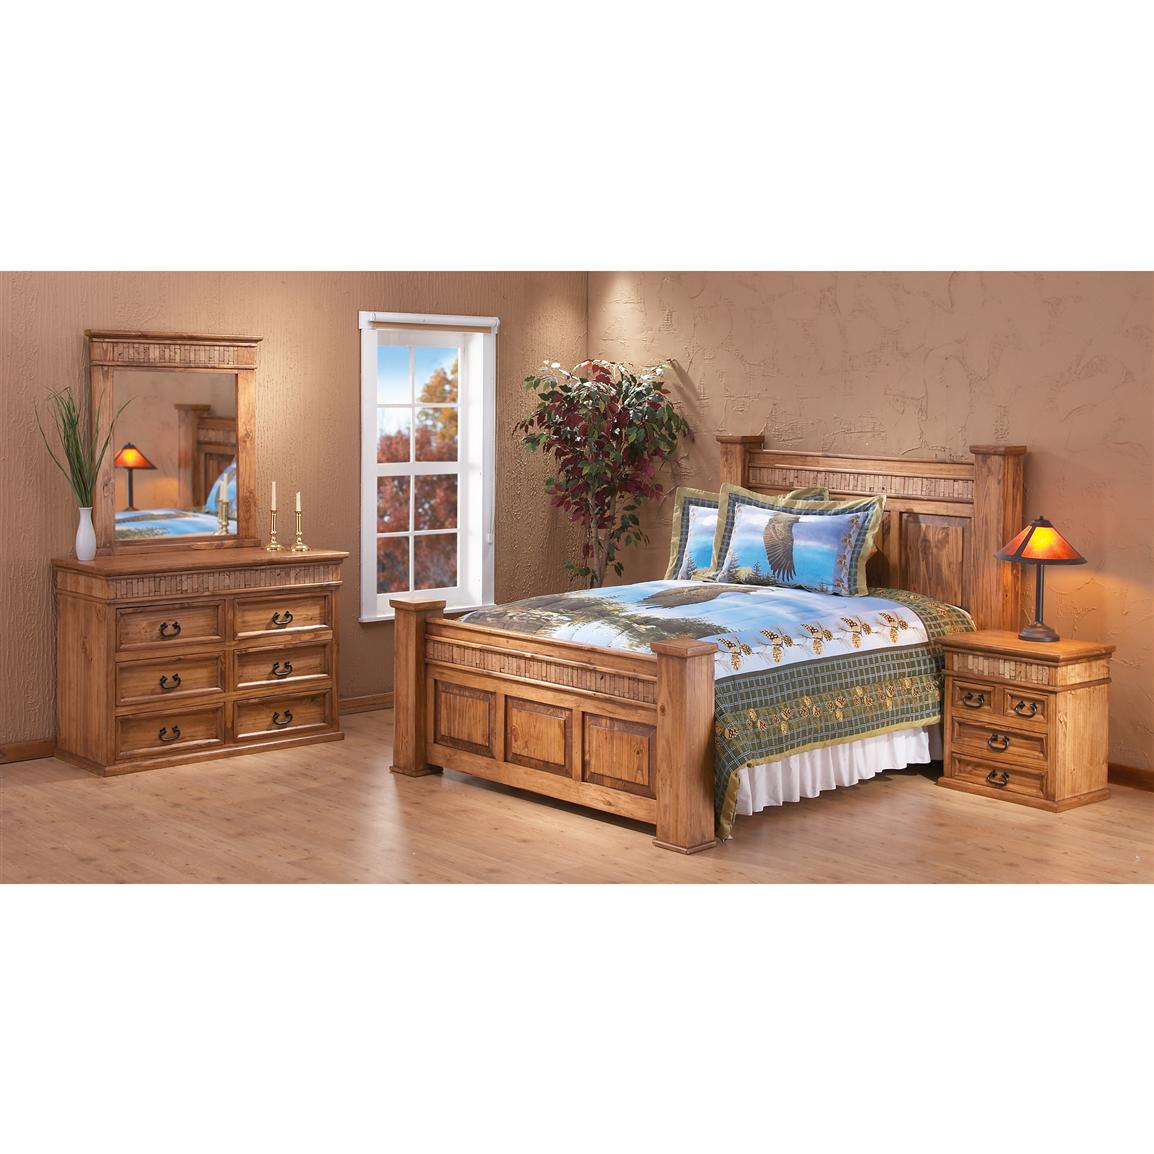 Gonzalez River Rock Headboard King 146591 Bedroom Furniture At within proportions 1154 X 1154